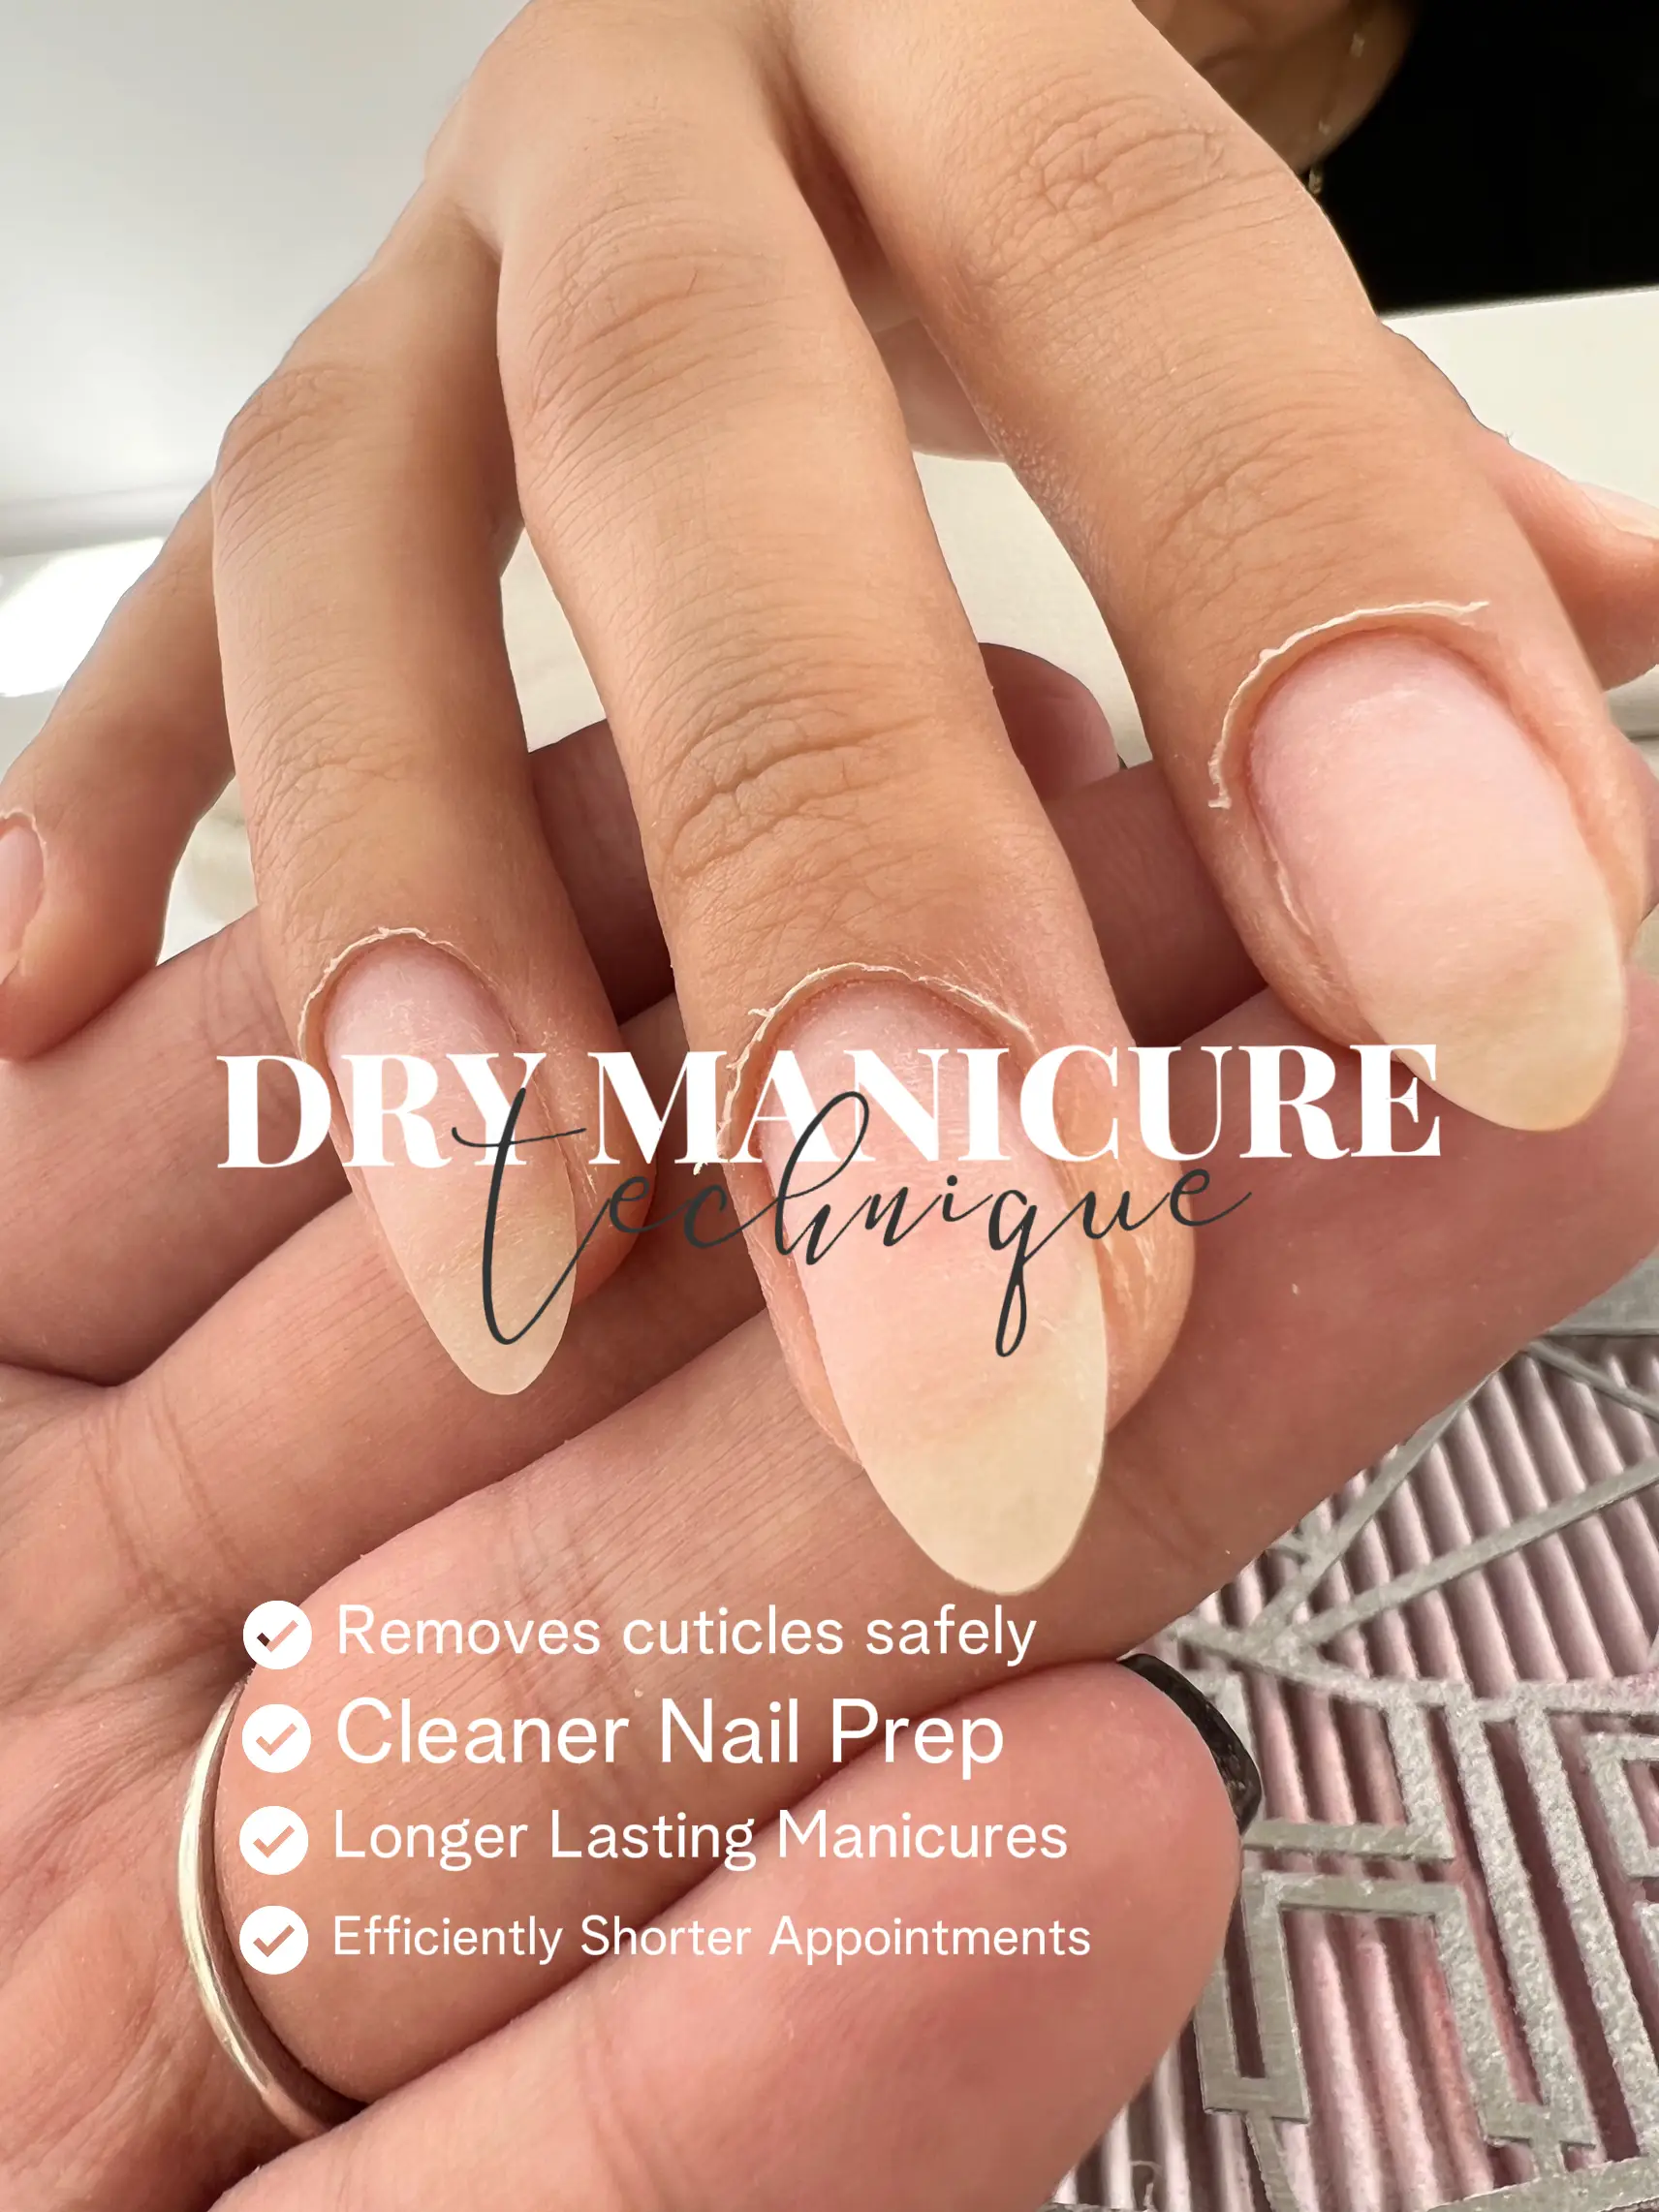 Dry Manicures A Healthy, Eco-Friendly Nail Care Routine